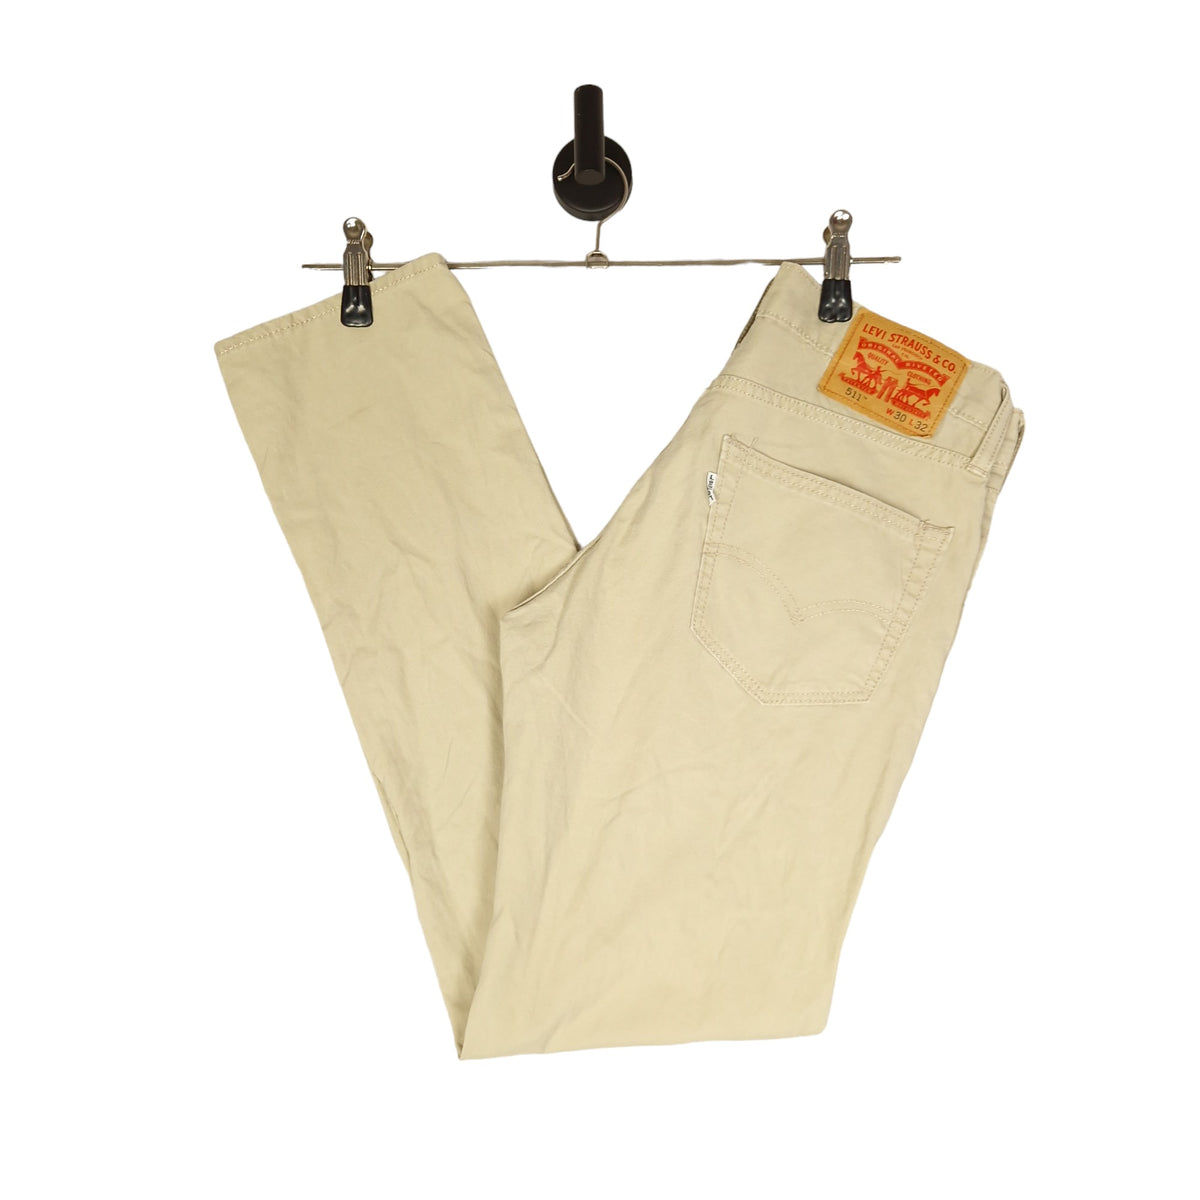 Levi's Chino Trousers - Size W30 L32